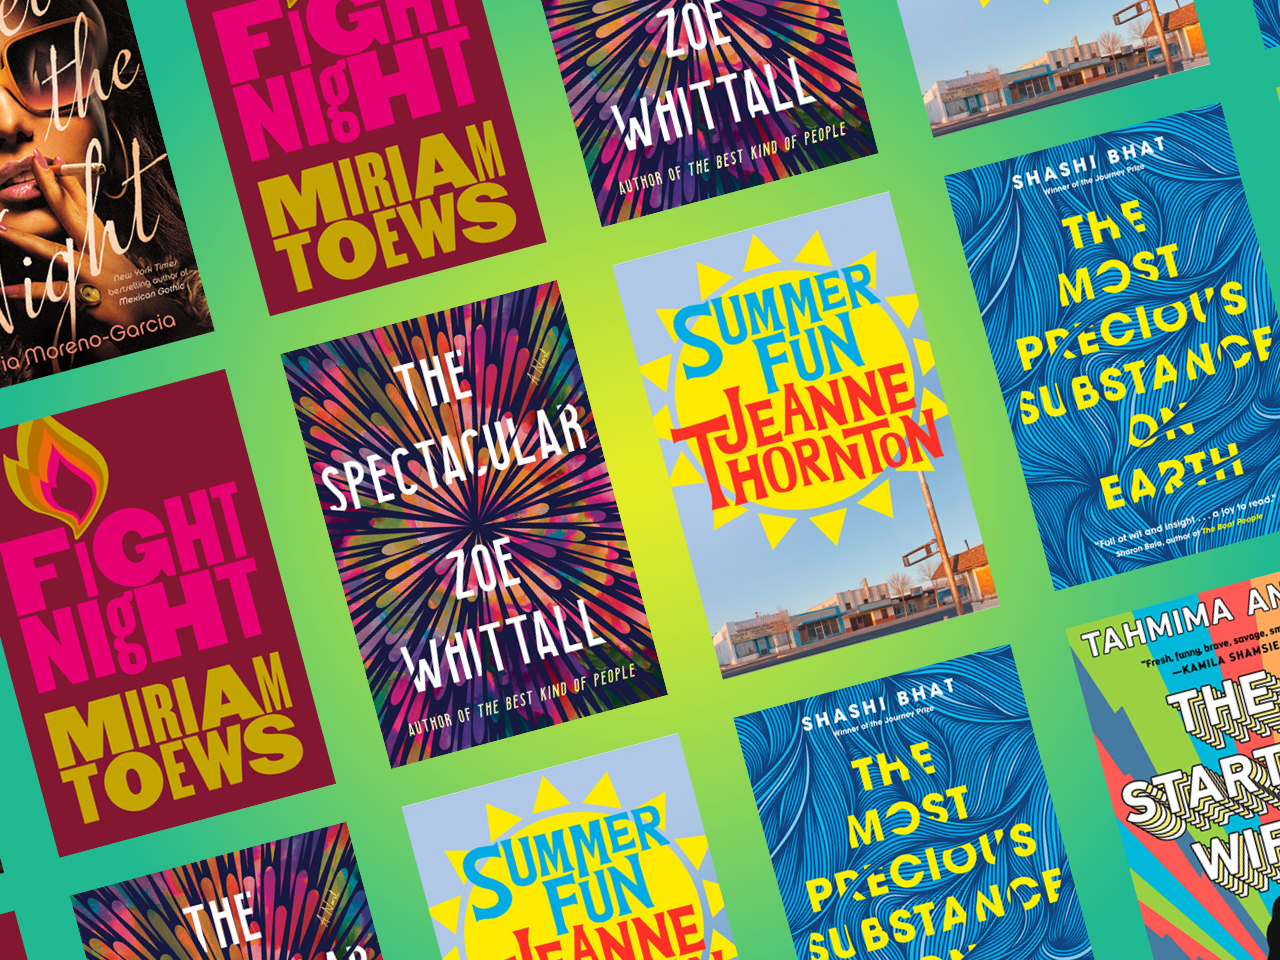 Summer Fun by Jeanne Thornton; Probably Ruby by Lisa Bird-Wilson; The Startup Wife by Tahmima Anam; The Spectacular by Zoe Whittall; The Most Precious Substance on Earth by Shashi Bhat; Fight Night by Miriam Toews; Velvet Was the Night by Silvia Moreno-Garcia